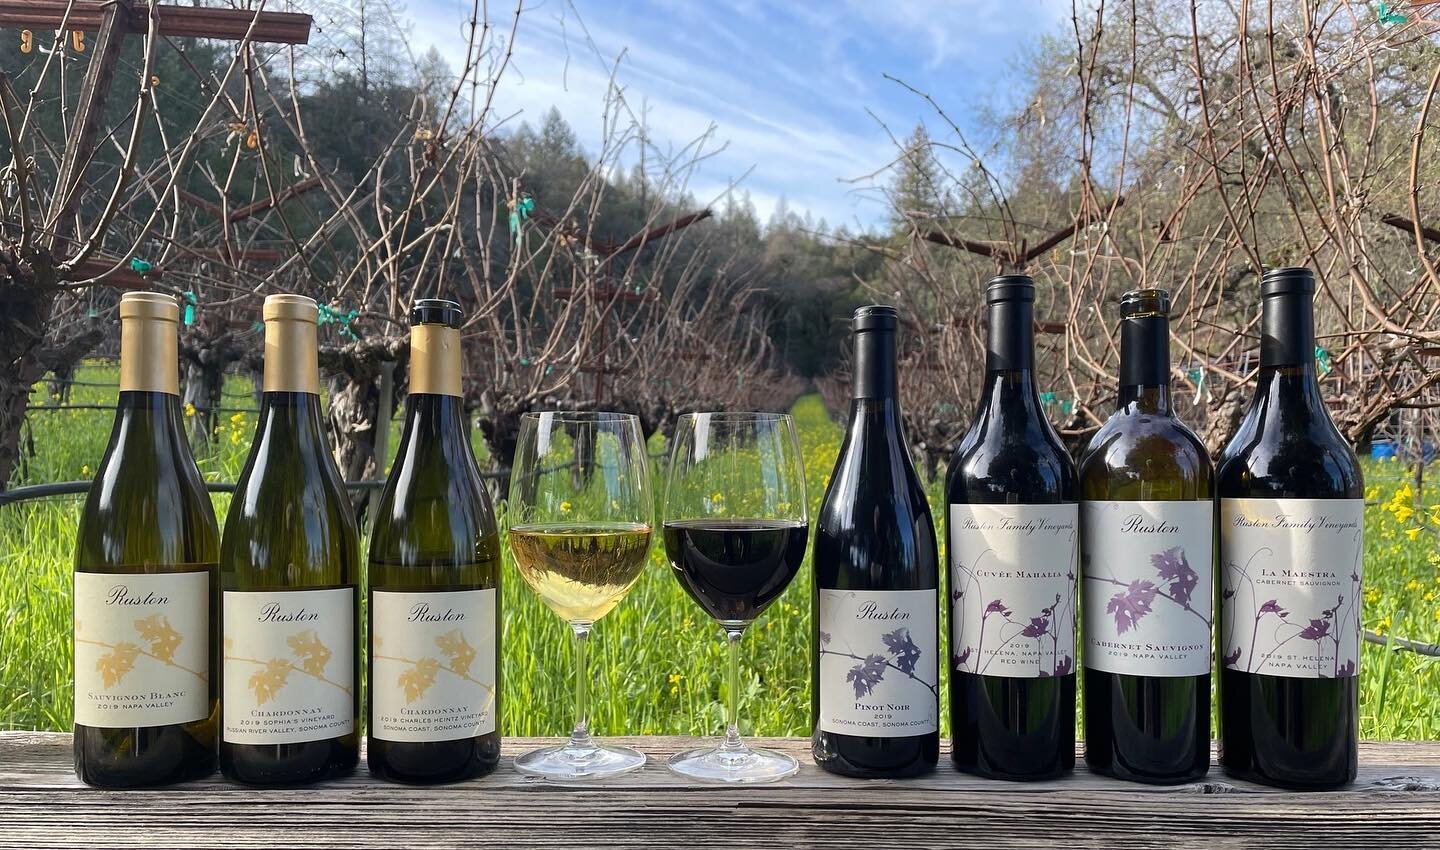 Our current releases! Visit our website for more info 🍷🍇

[tags]

#napavalley #napa #winecountry #sthelena #rustonfamilyvineyards #wine #winelover